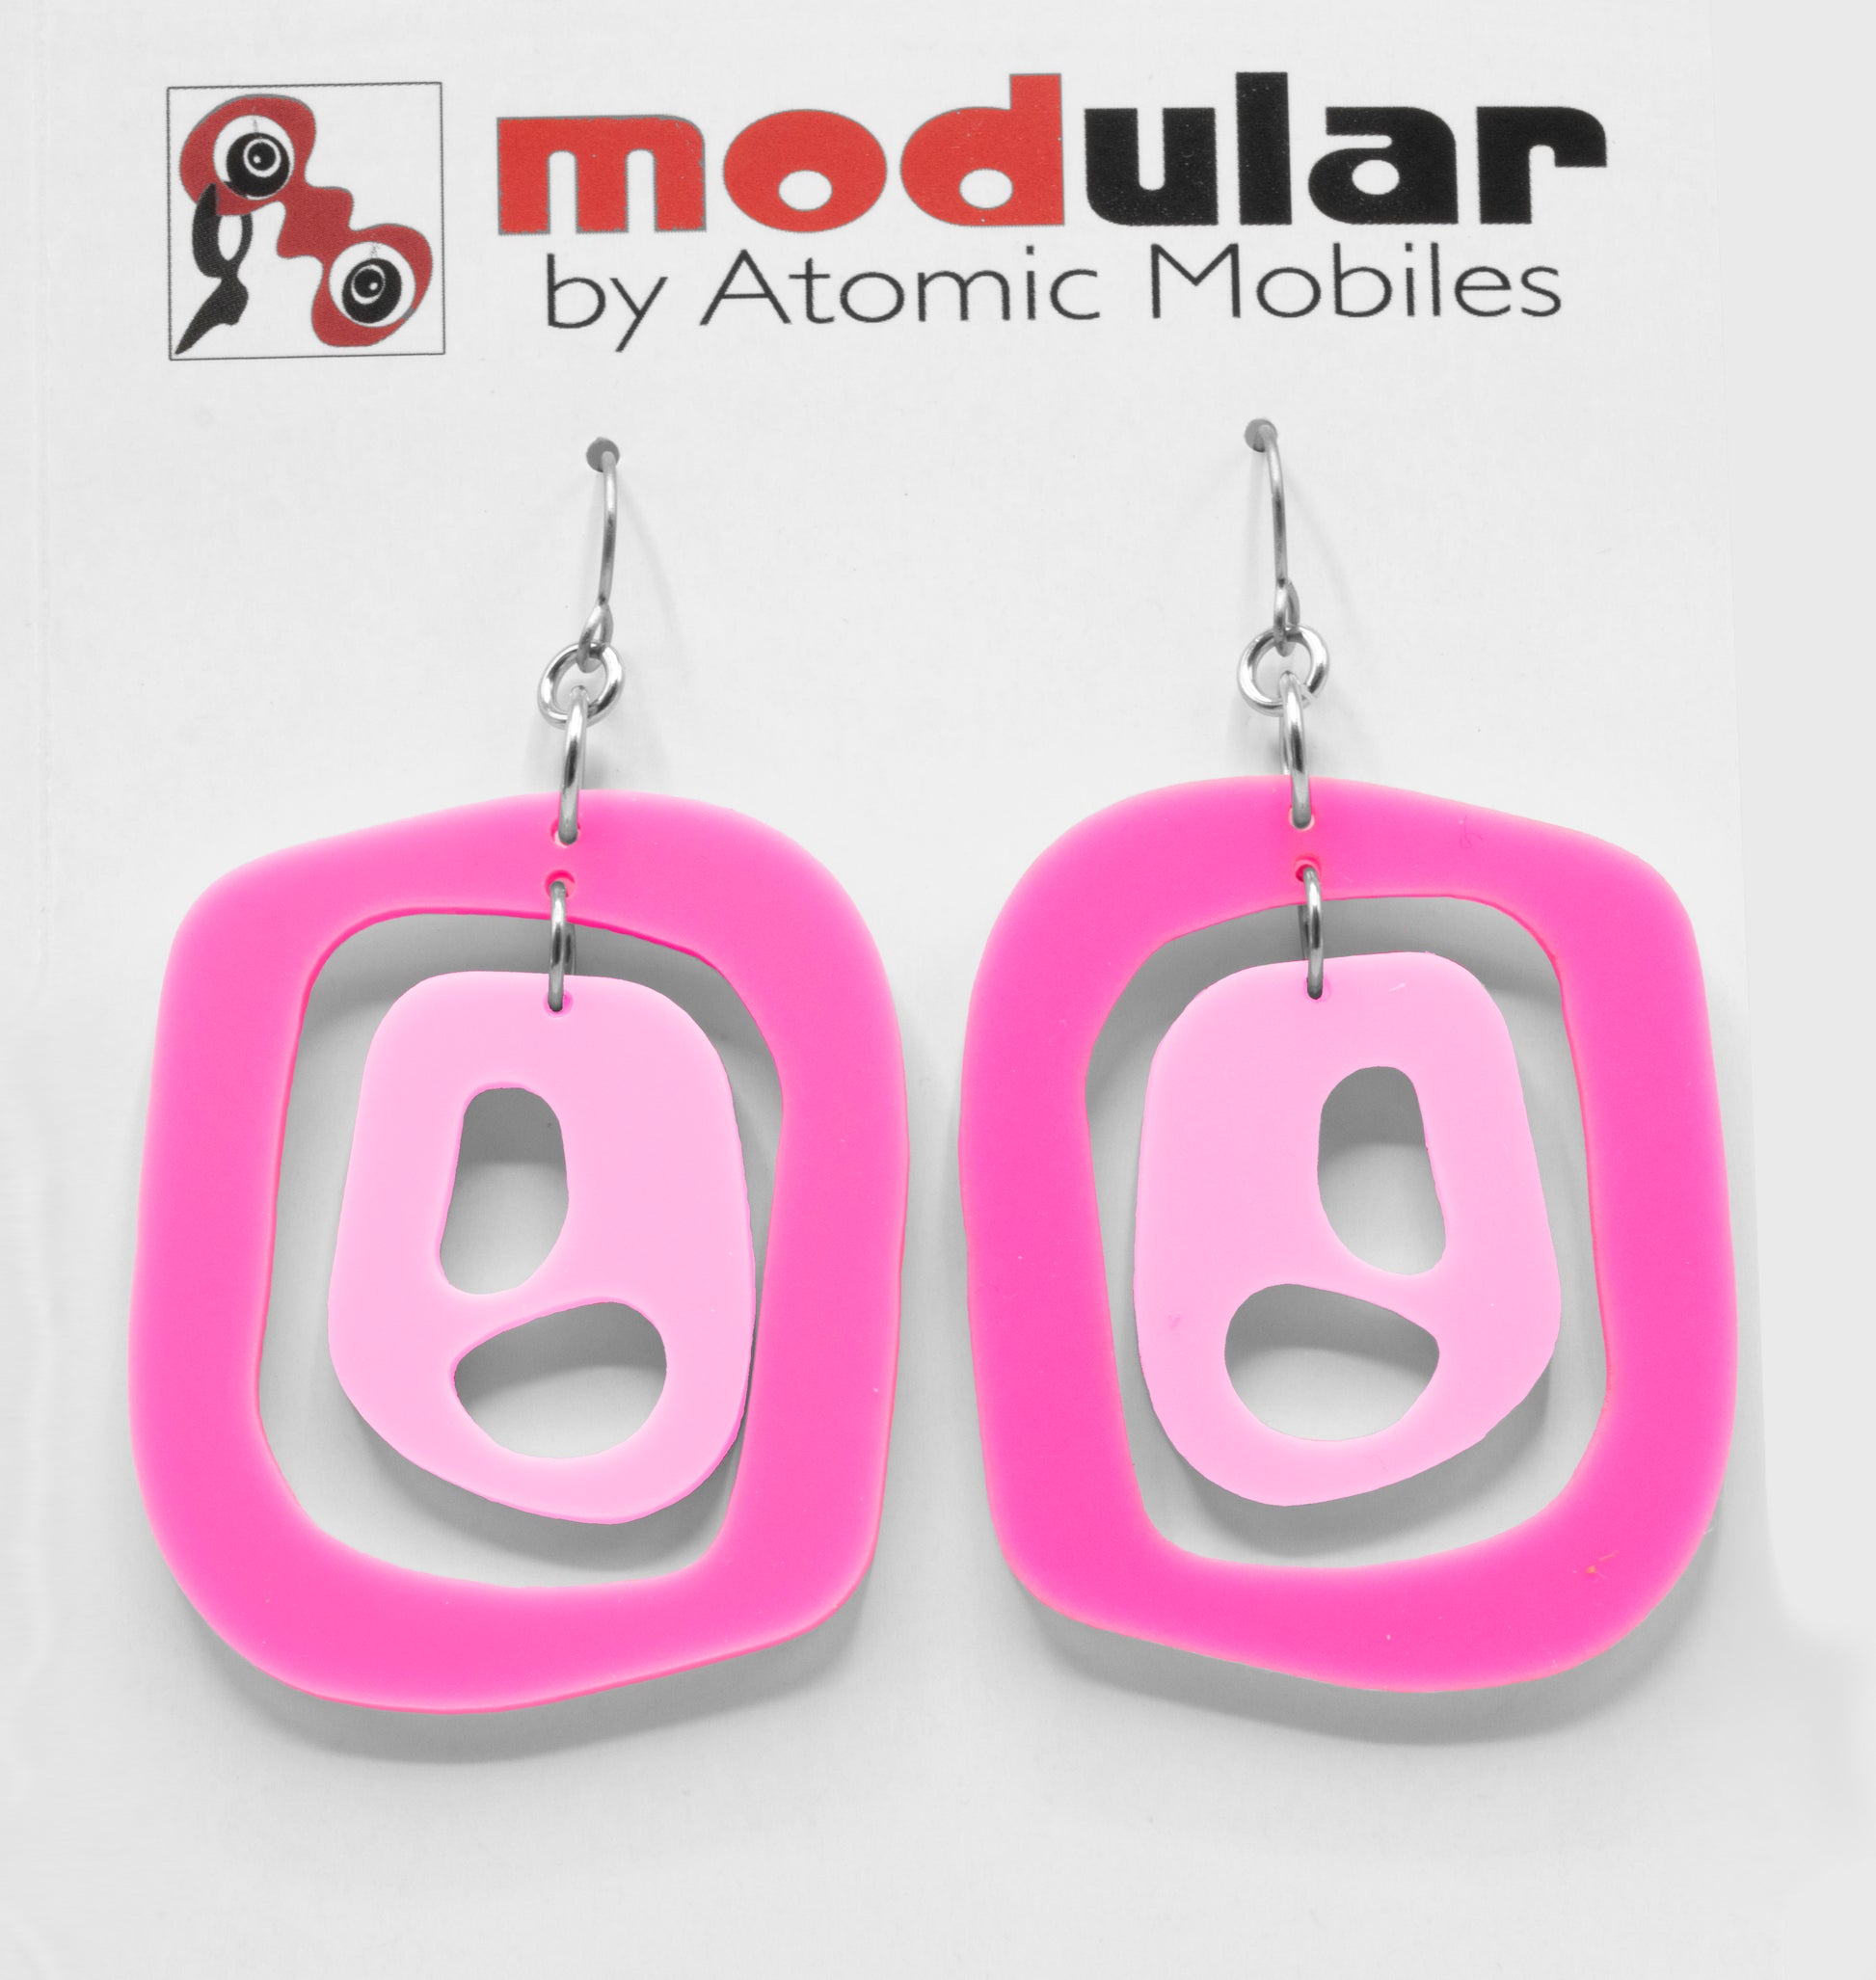 MODular Earrings - Mid 20th Statement Earrings in Hot Pink by AtomicMobiles.com - retro era mod handmade jewelry